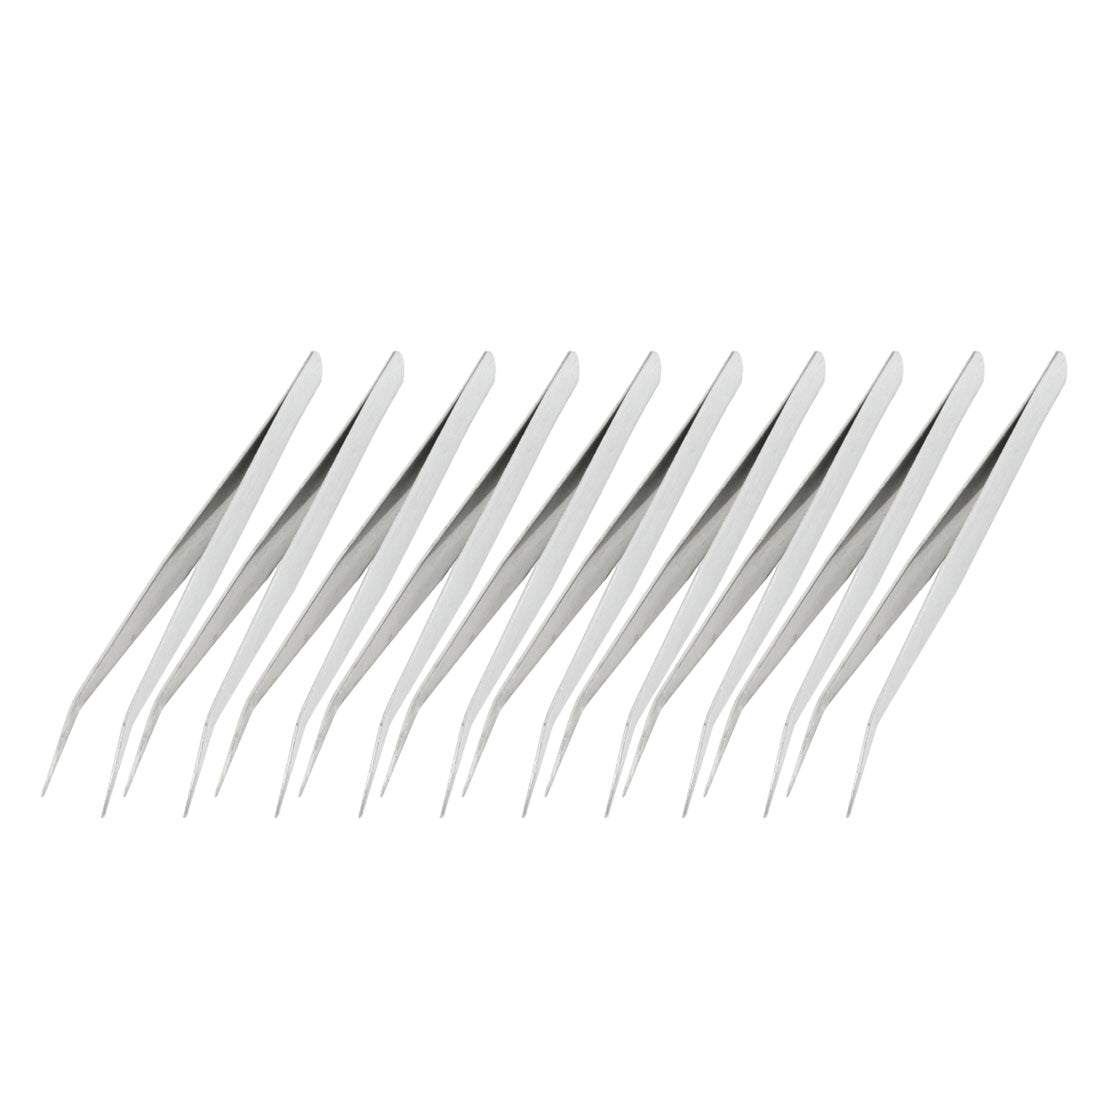 uxcell Uxcell 10 Pcs Silver Tone Stainless Steel Curved Tweezers 13.5cm Length